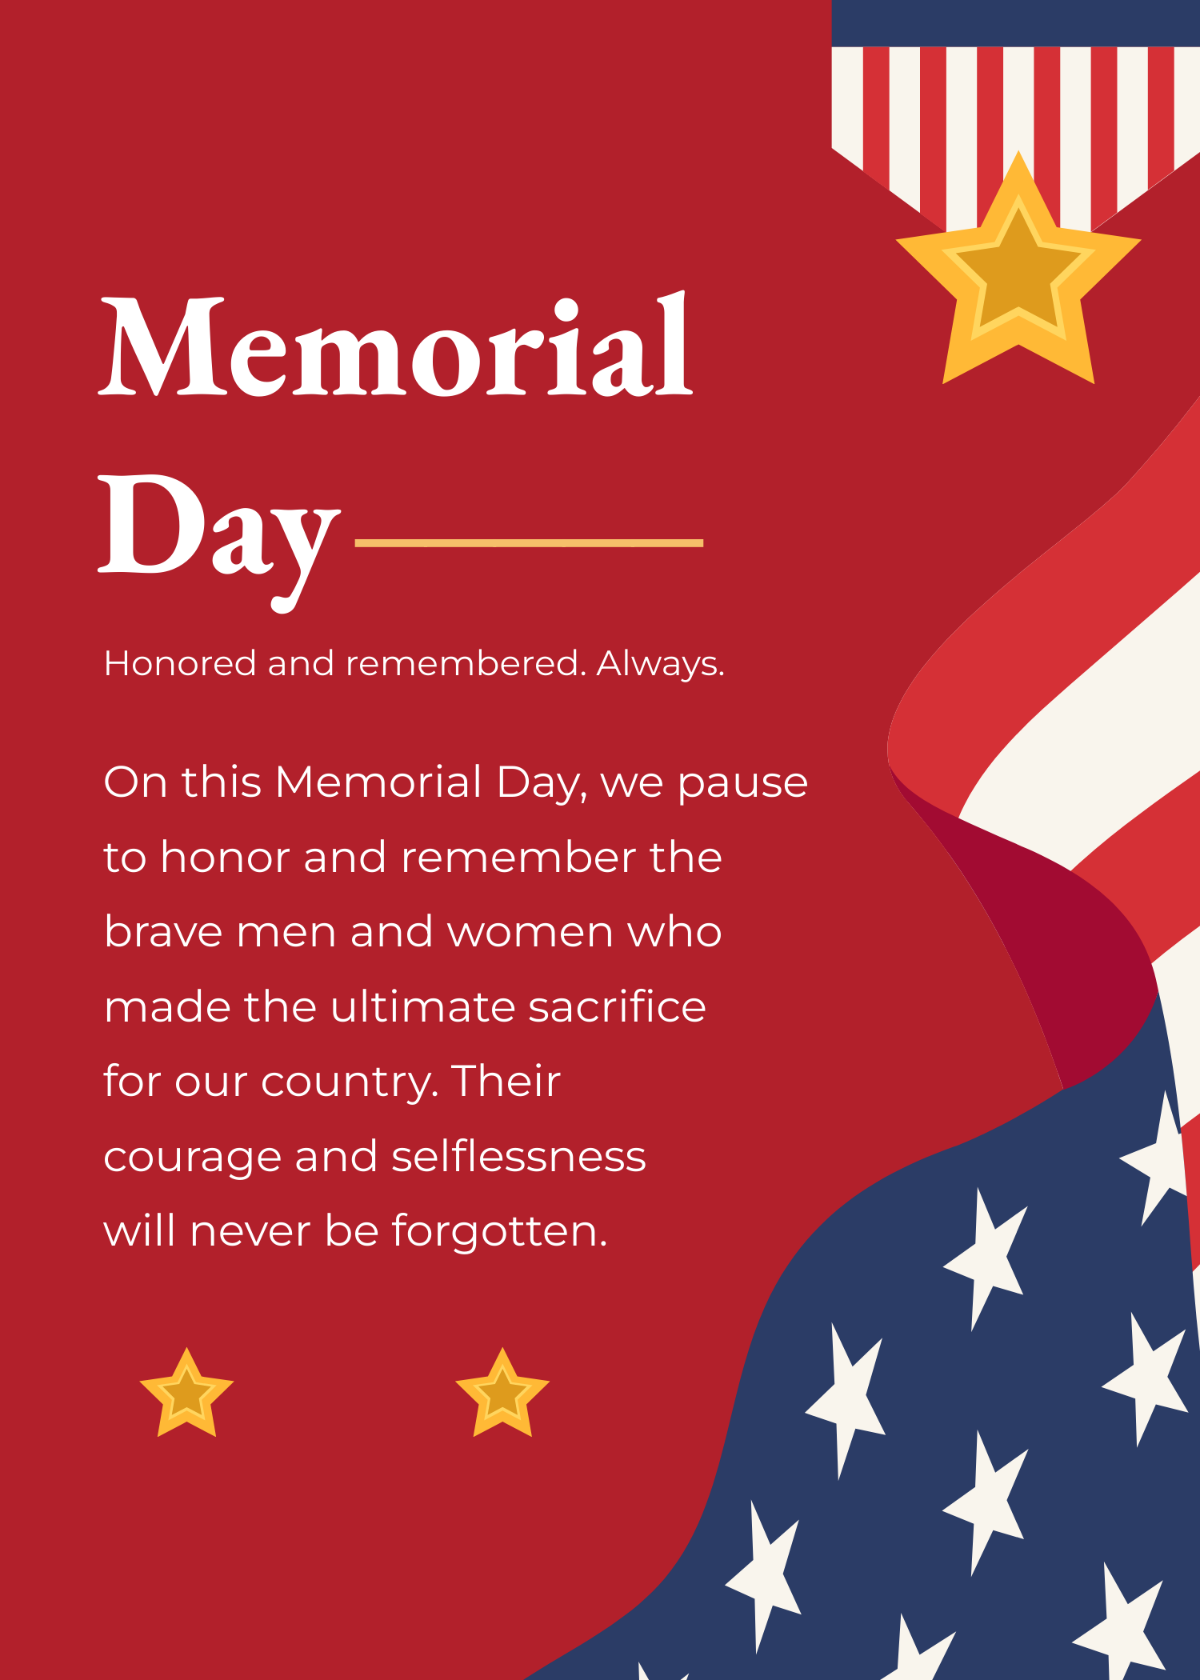 Memorial Day Observance Message Template